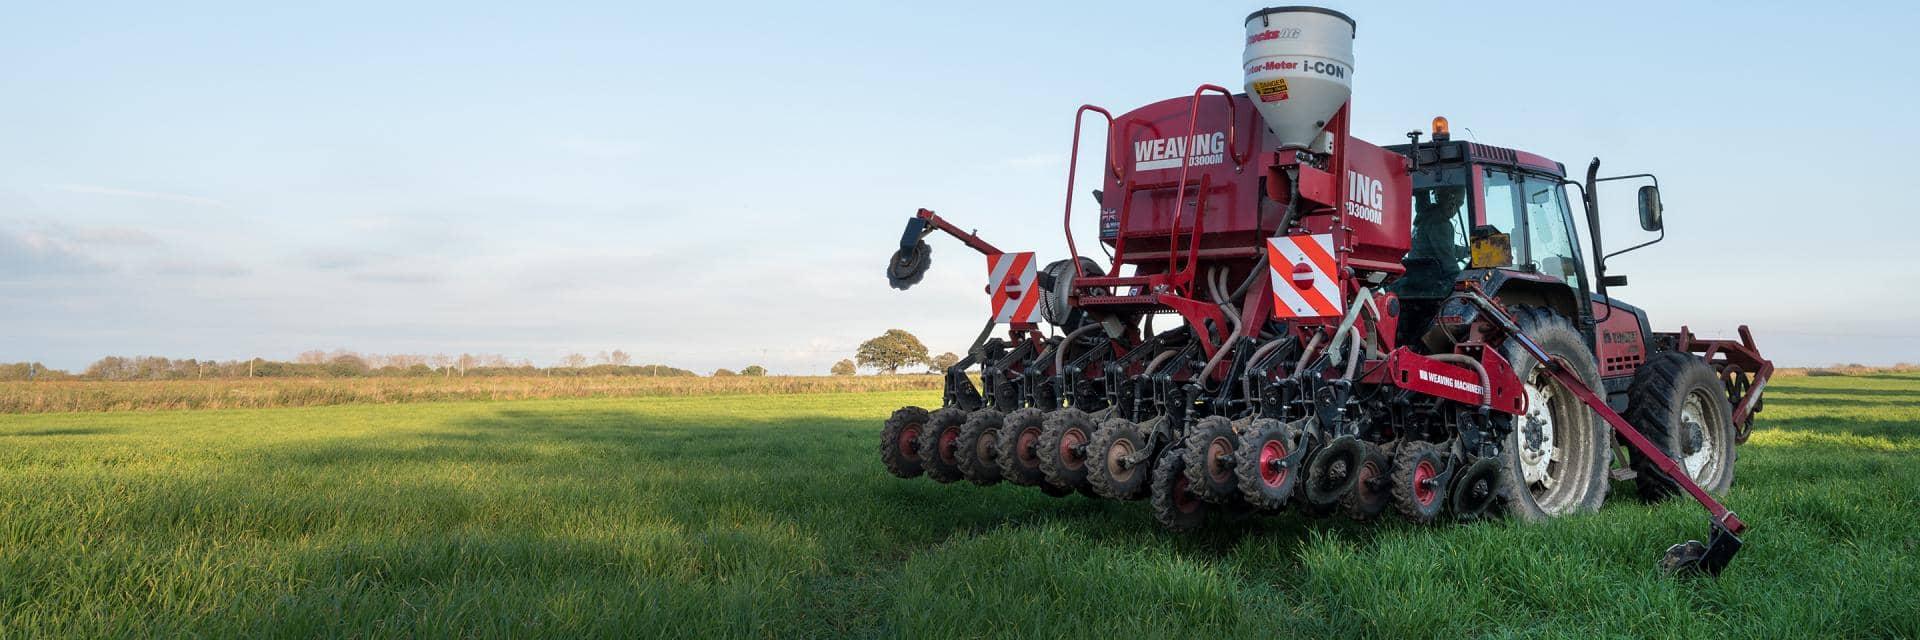 A large red agricultural vehicle being driven through a field of grass